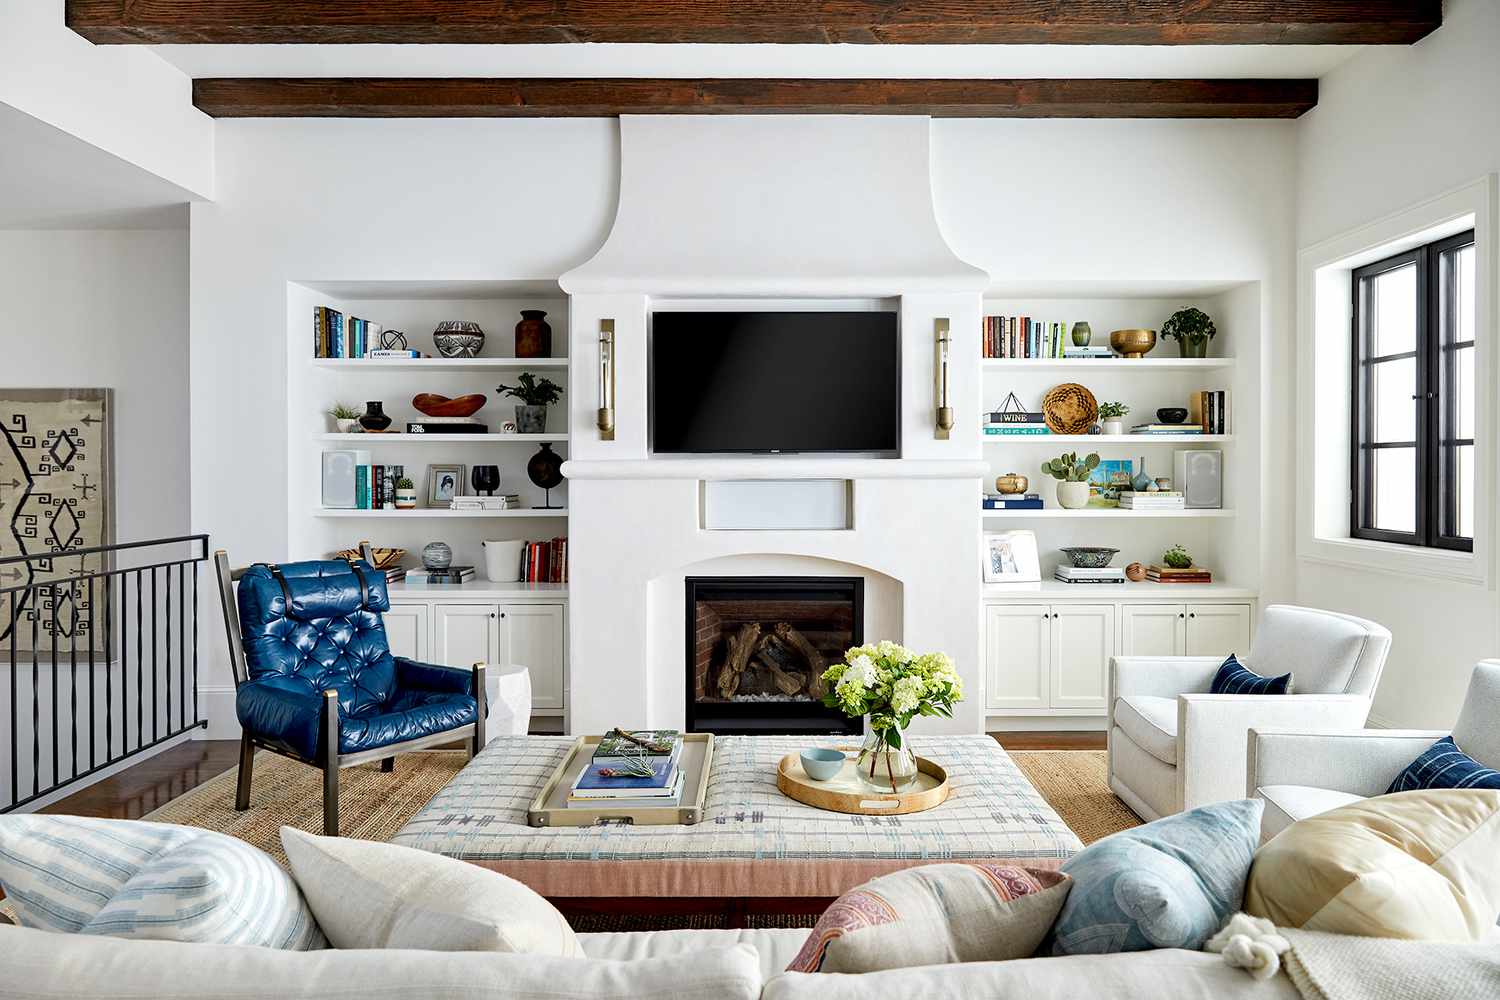 How To Decorate Built-In Shelves In Living Room